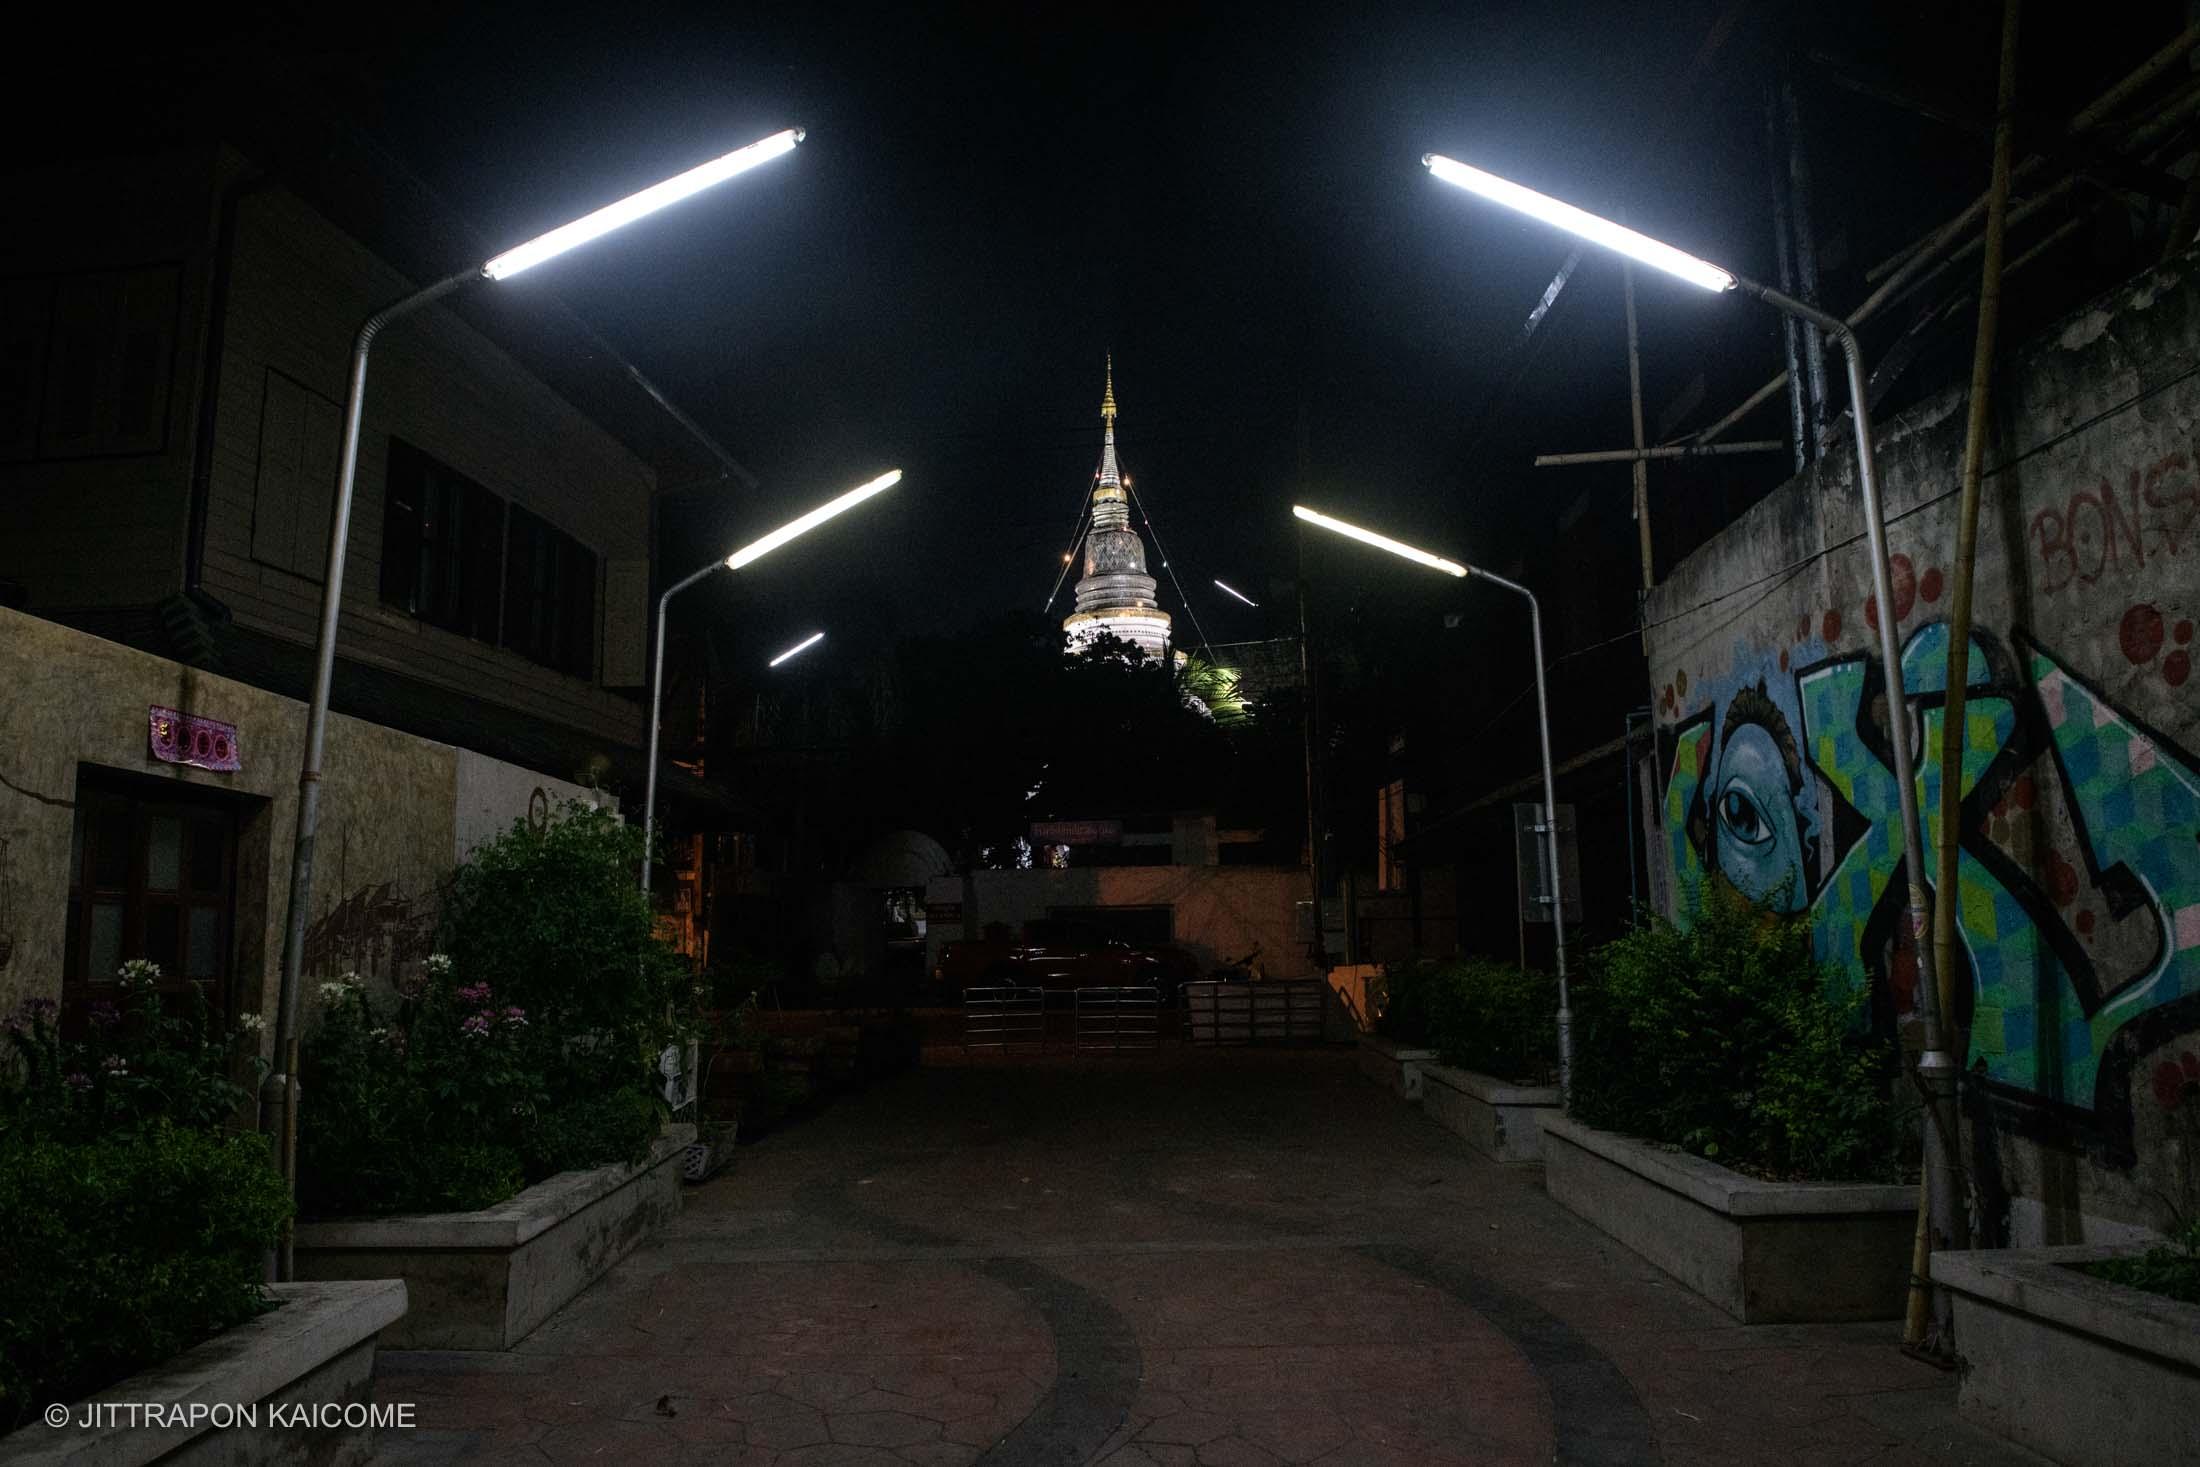 Chiang Mai During Covid-19 - 08.43 PM - Empty and silent in front of Wat Ket Karam,...